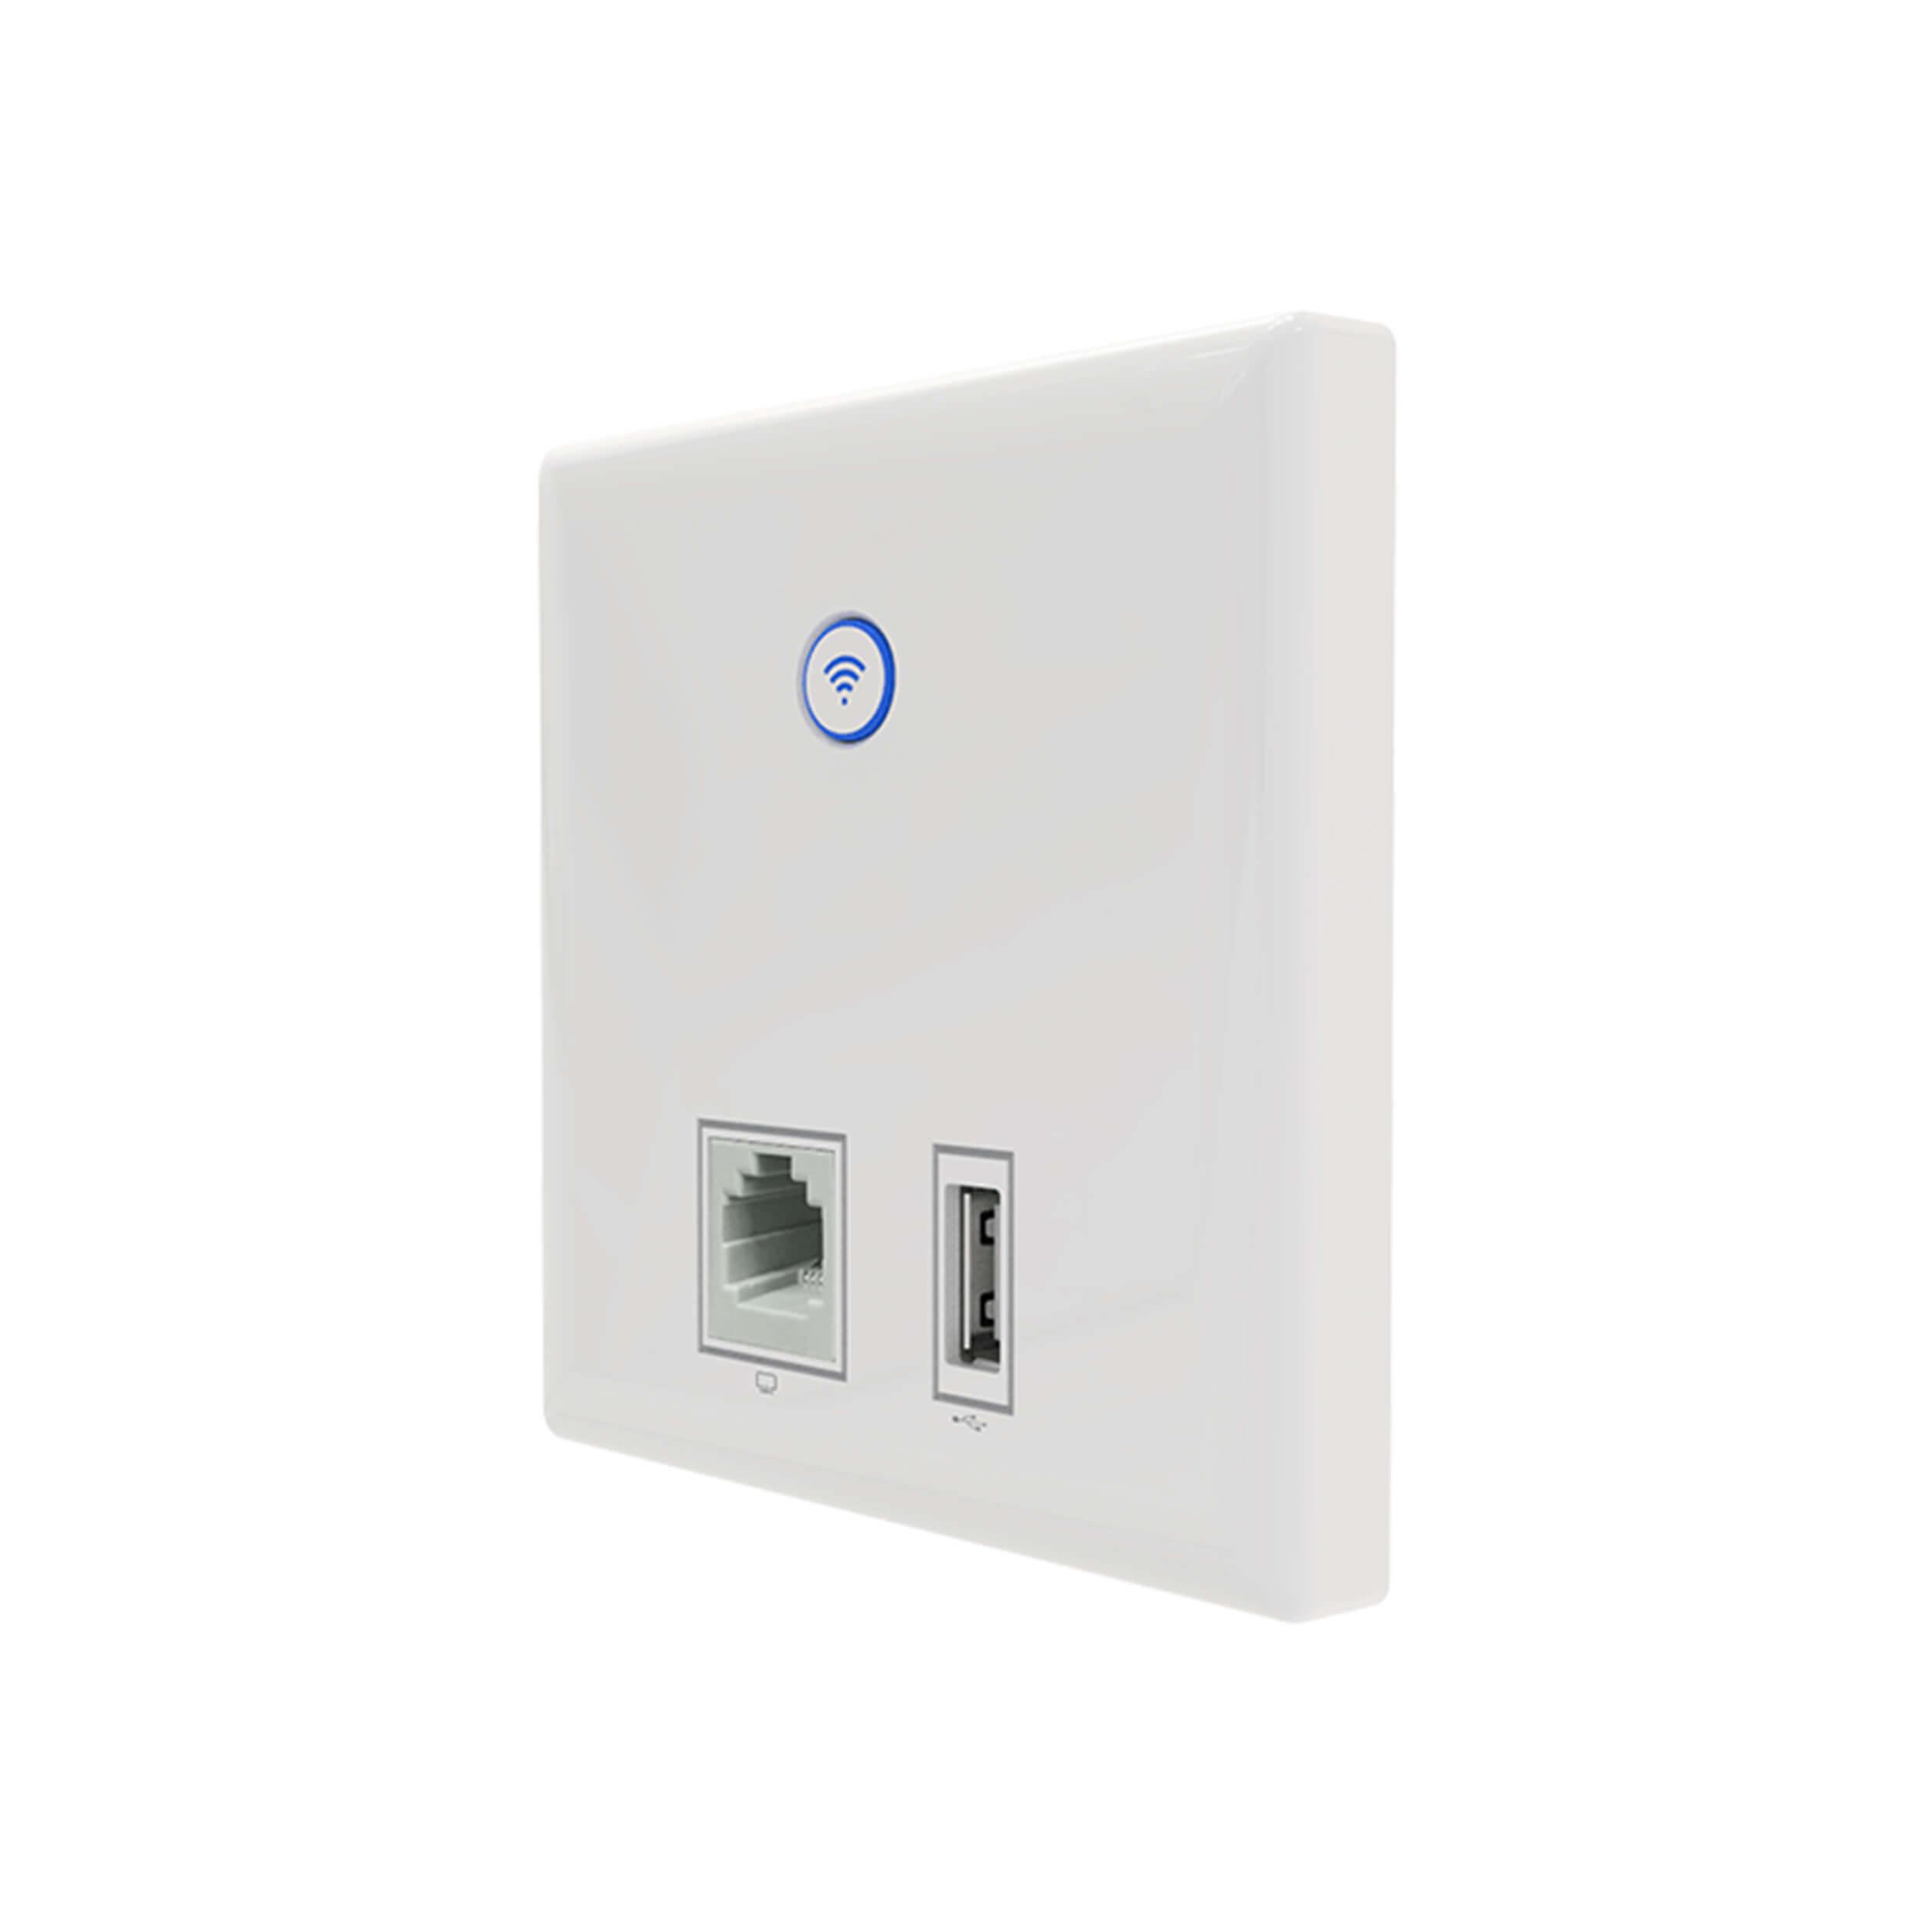 WAP U - 2.4GHz 300Mbps In-Wall AP with USB Charger